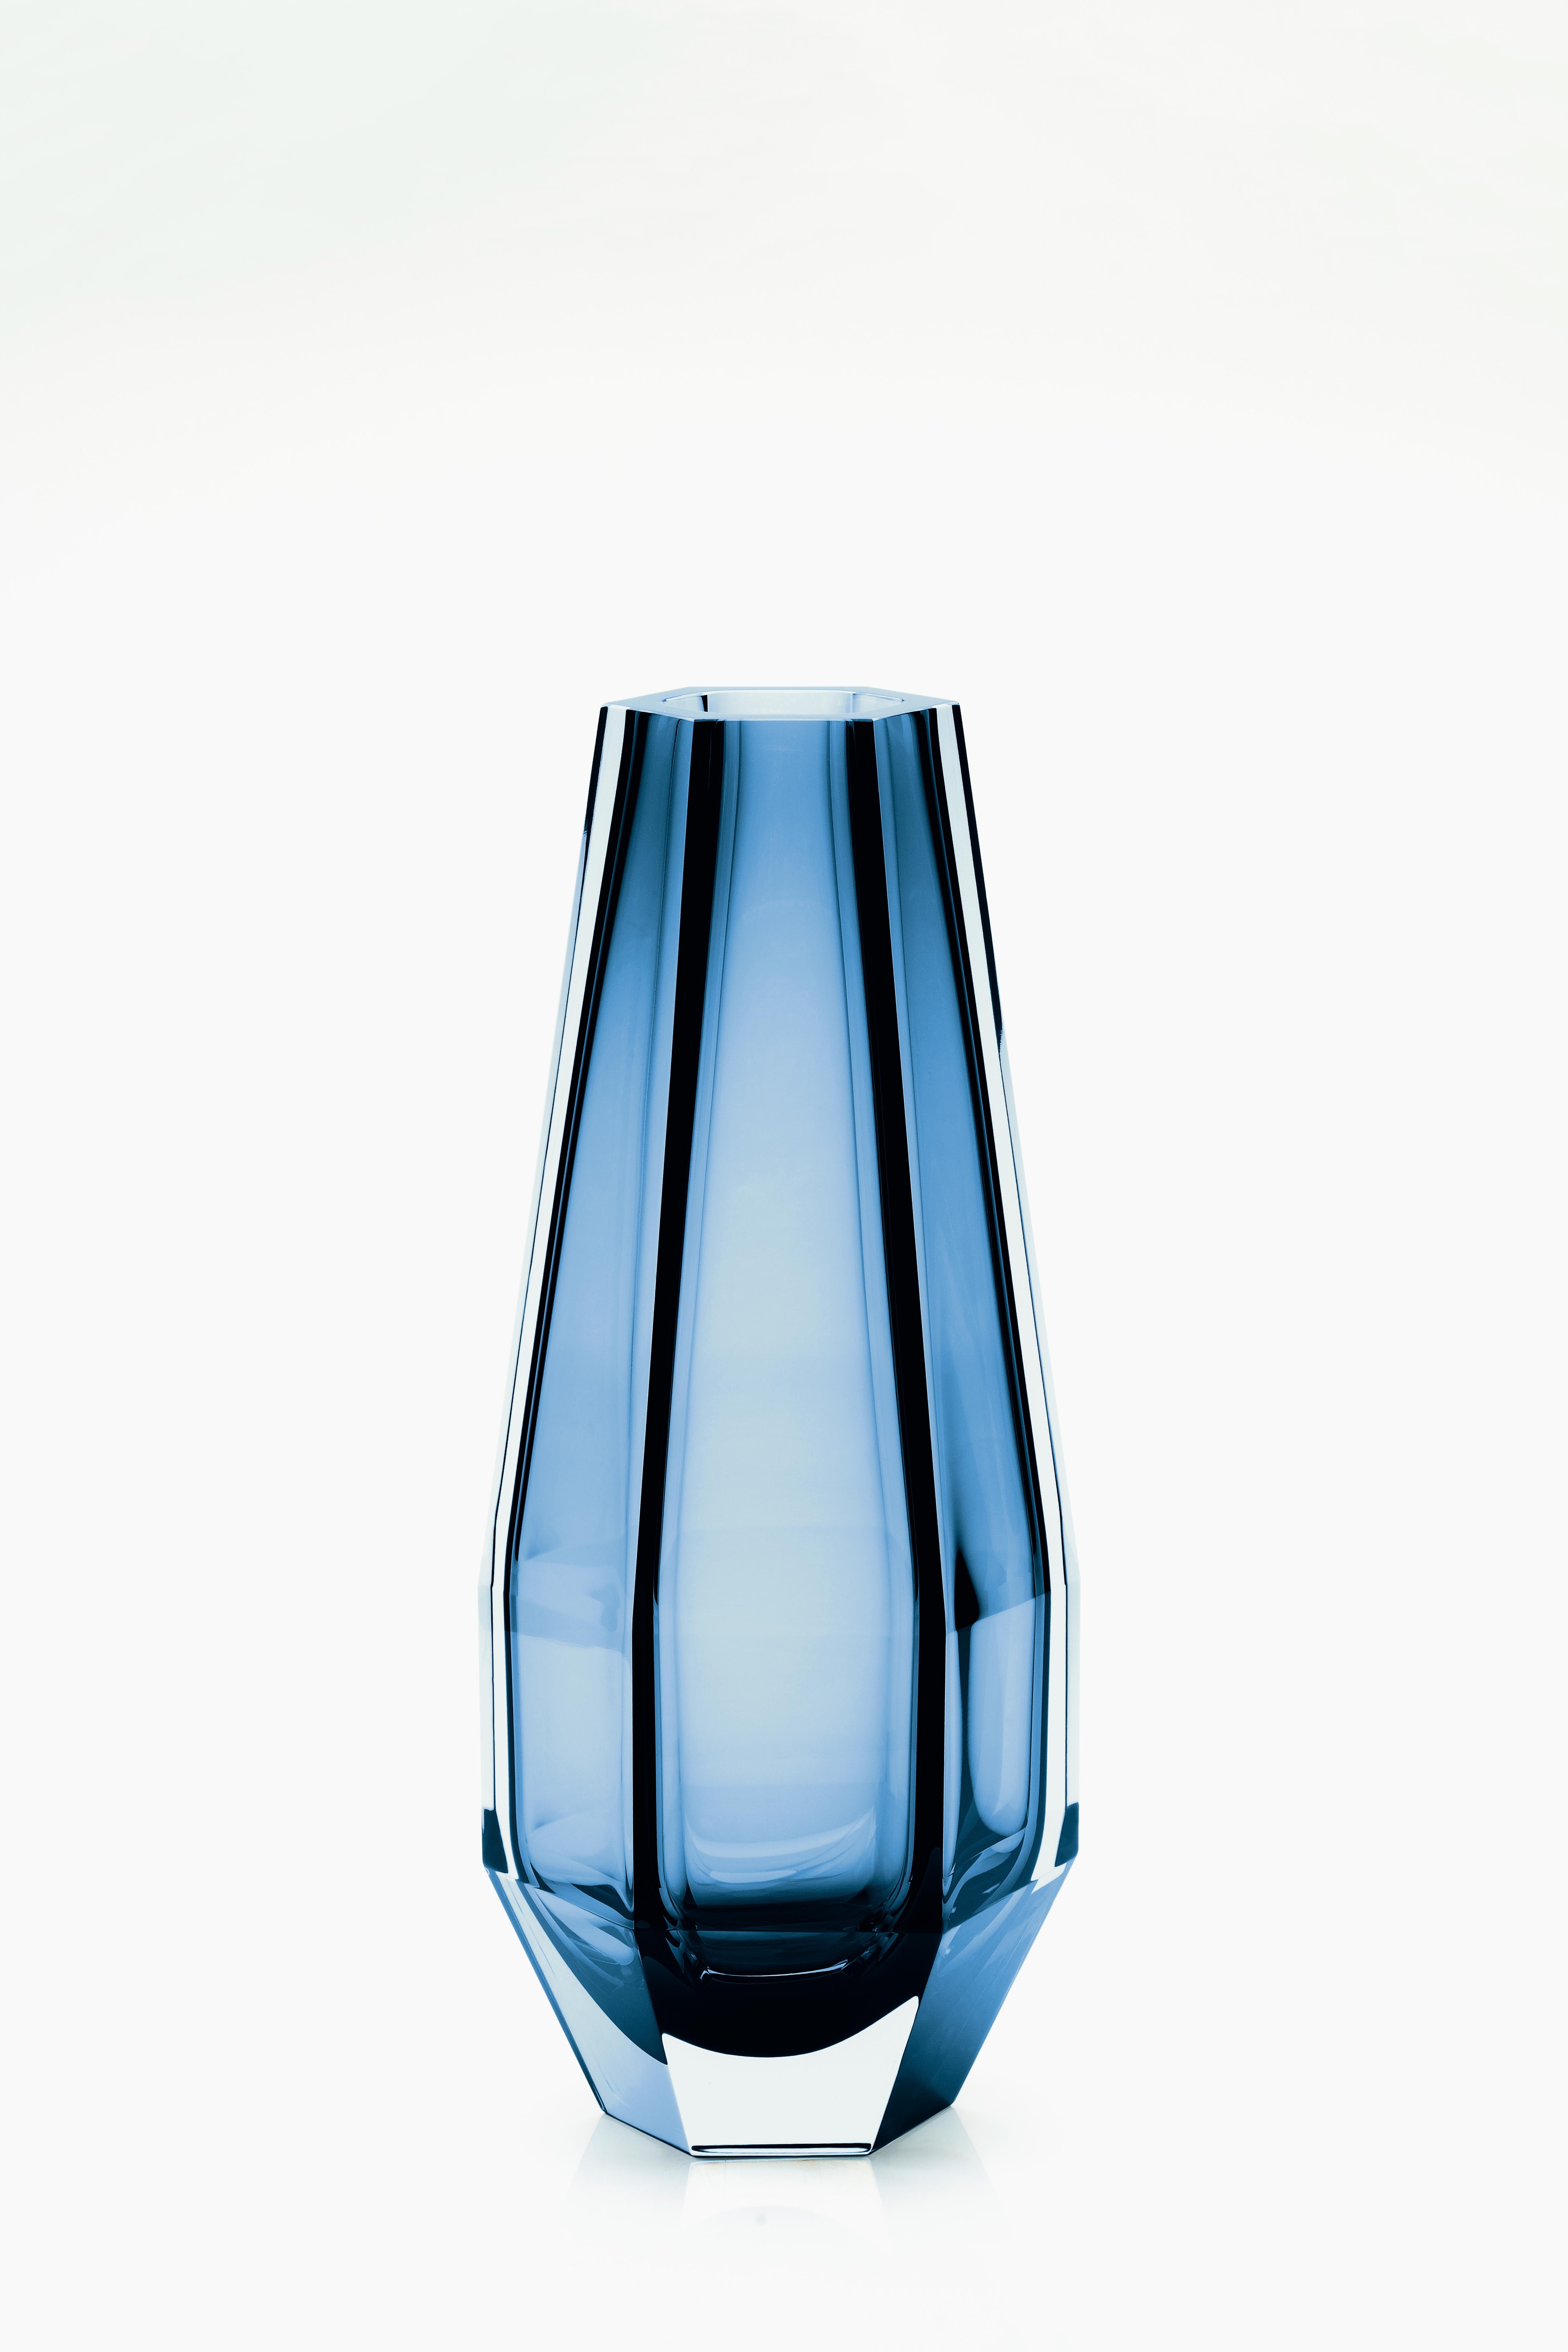 21st Century Alessandro Mendini, GEMELLA transparent vase, Murano glass.
Purho continues to search for products with complementary shapes with the pair of Gemello and Gemella vases designed by Alessandro Mendini. Sharing the same design concept,